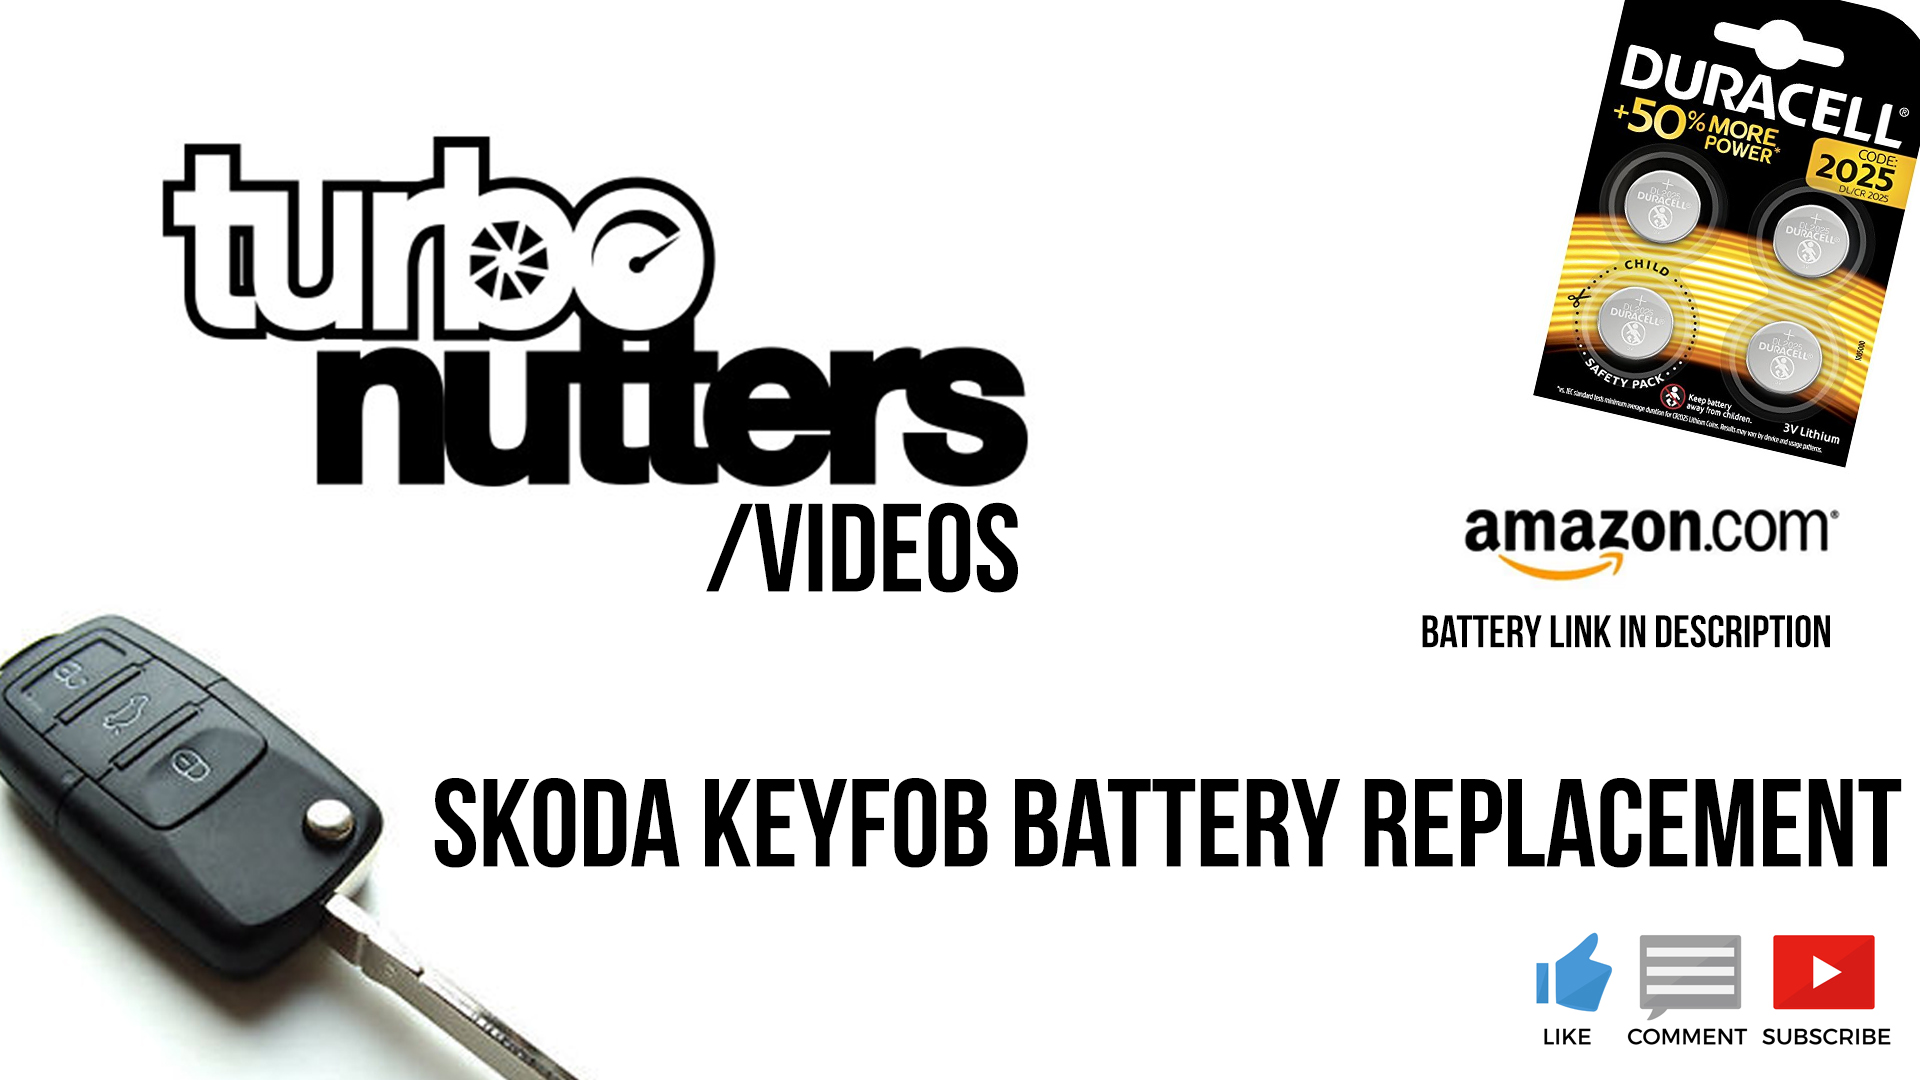 HOW TO: Change the keyfob battery in your Skoda Octavia / Golf / Seat Audi Hypermiler.co.uk